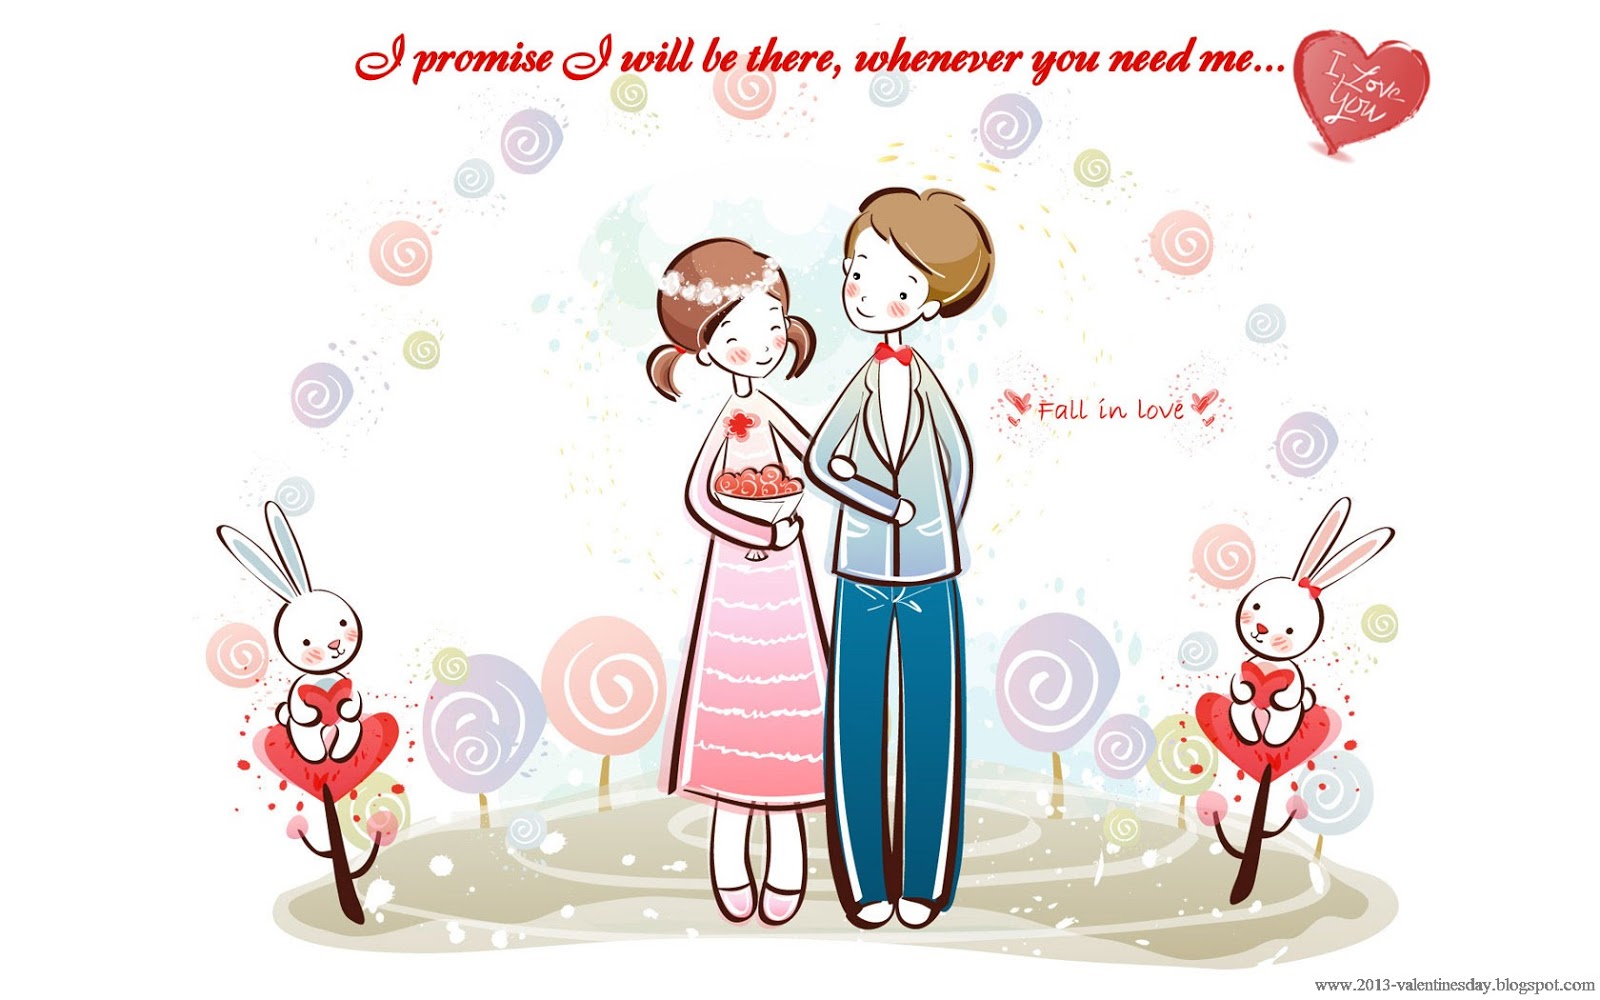 snooprzgirl: Cute Cartoon Couple Love Hd wallpapers for Valentines day